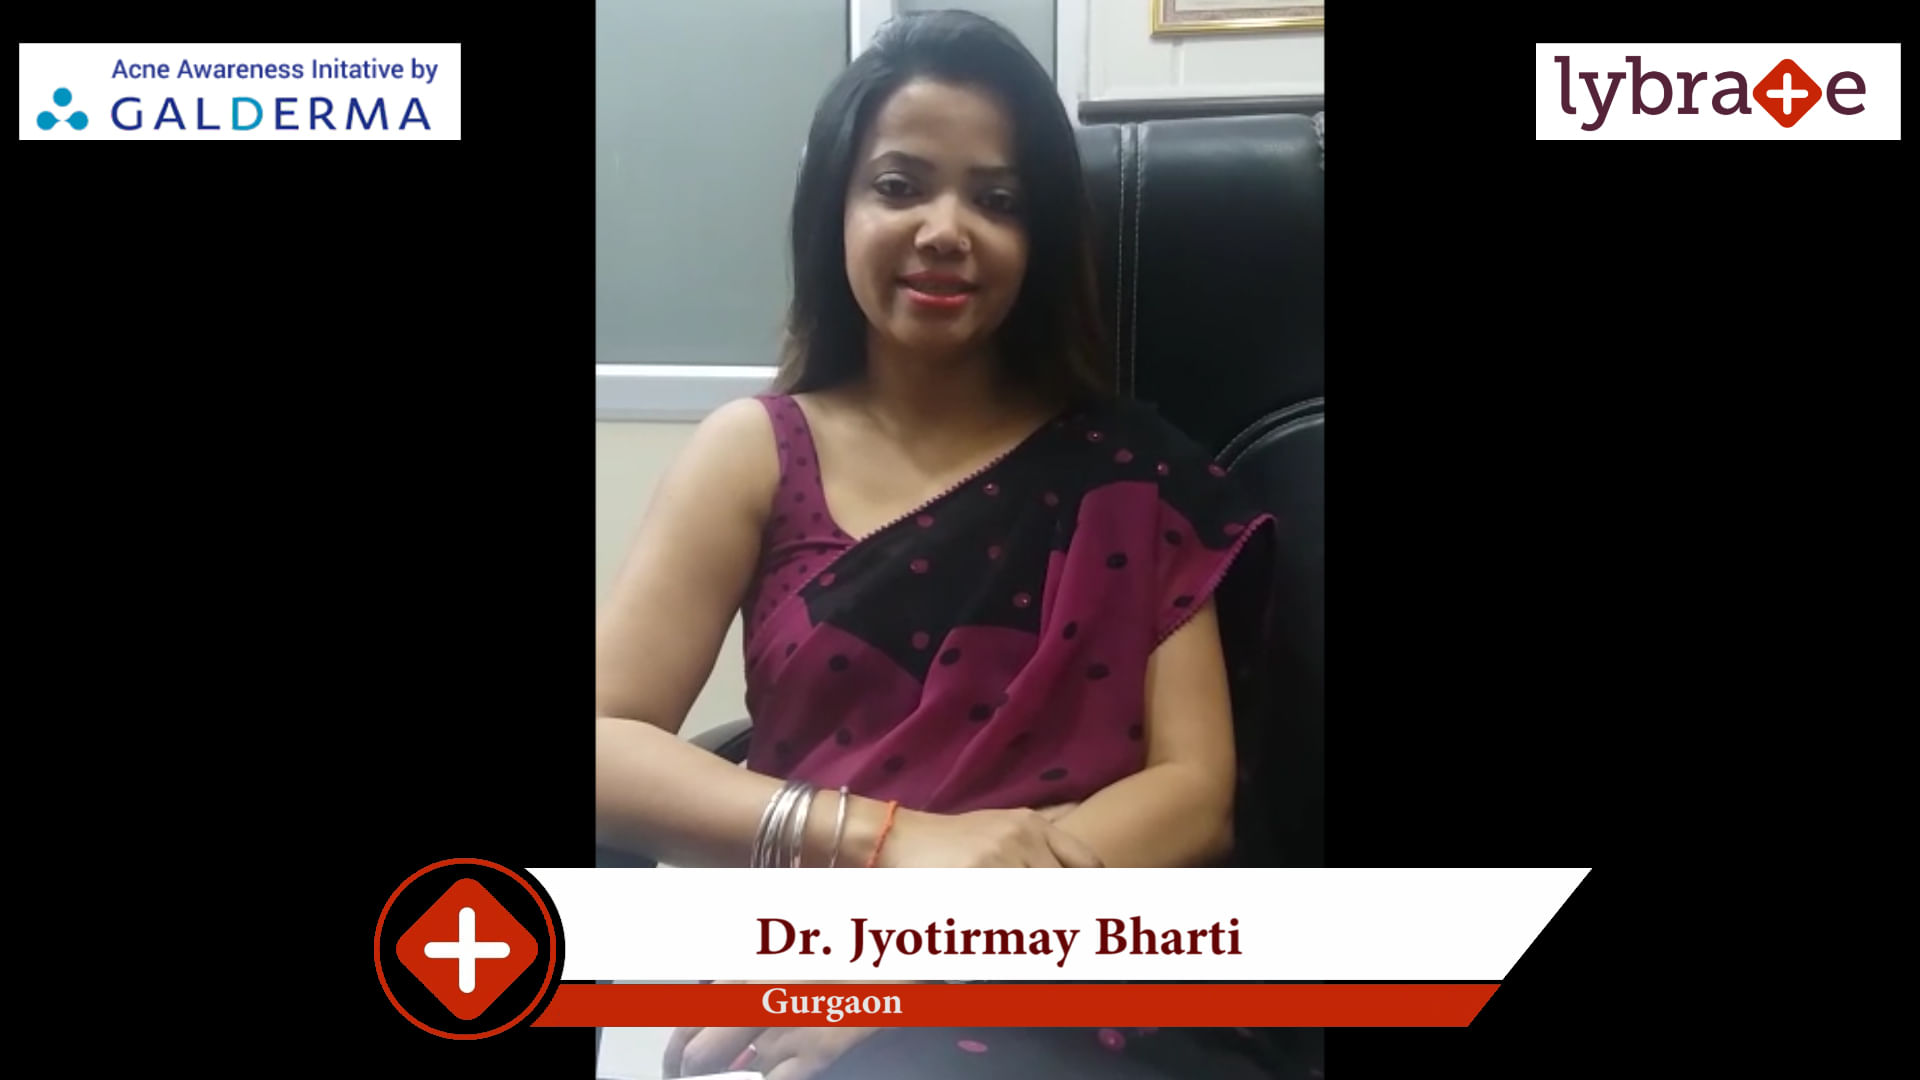 Lybrate | Dr. Jyotirmay Bharti speaks on IMPORTANCE OF TREATING ACNE EARLY